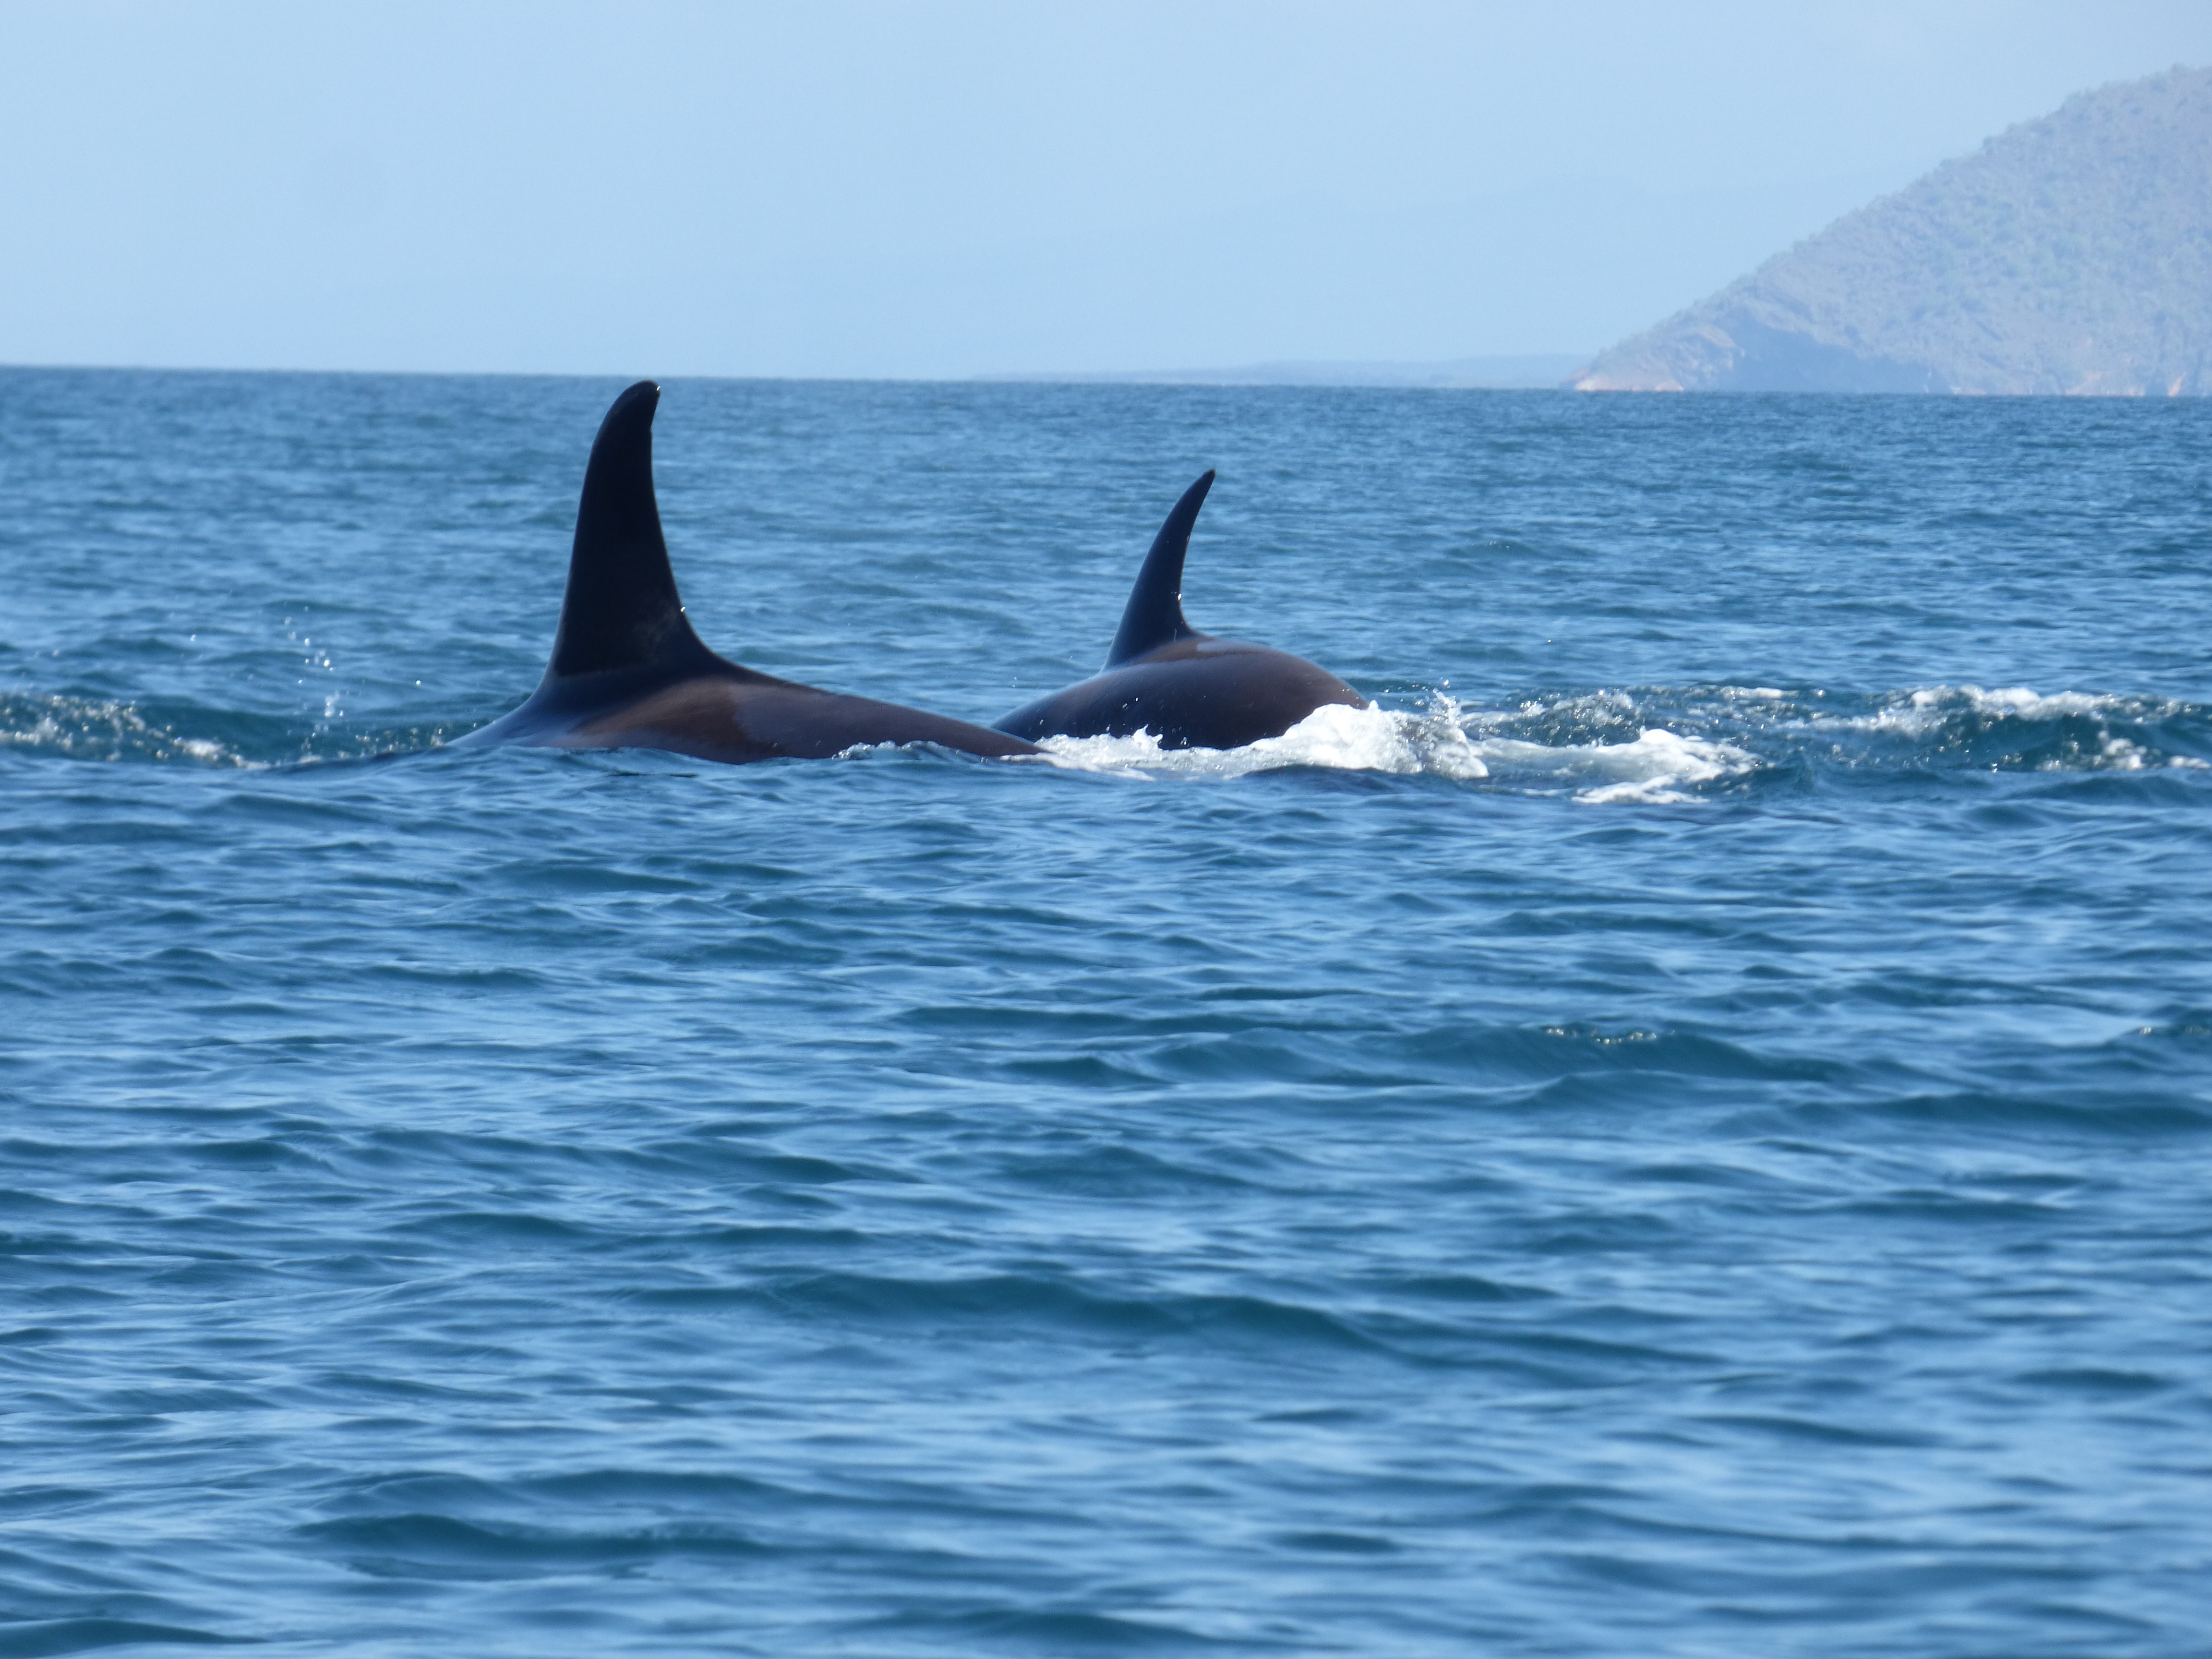 Divergent foraging strategies between populations of sympatric matrilineal killer whales